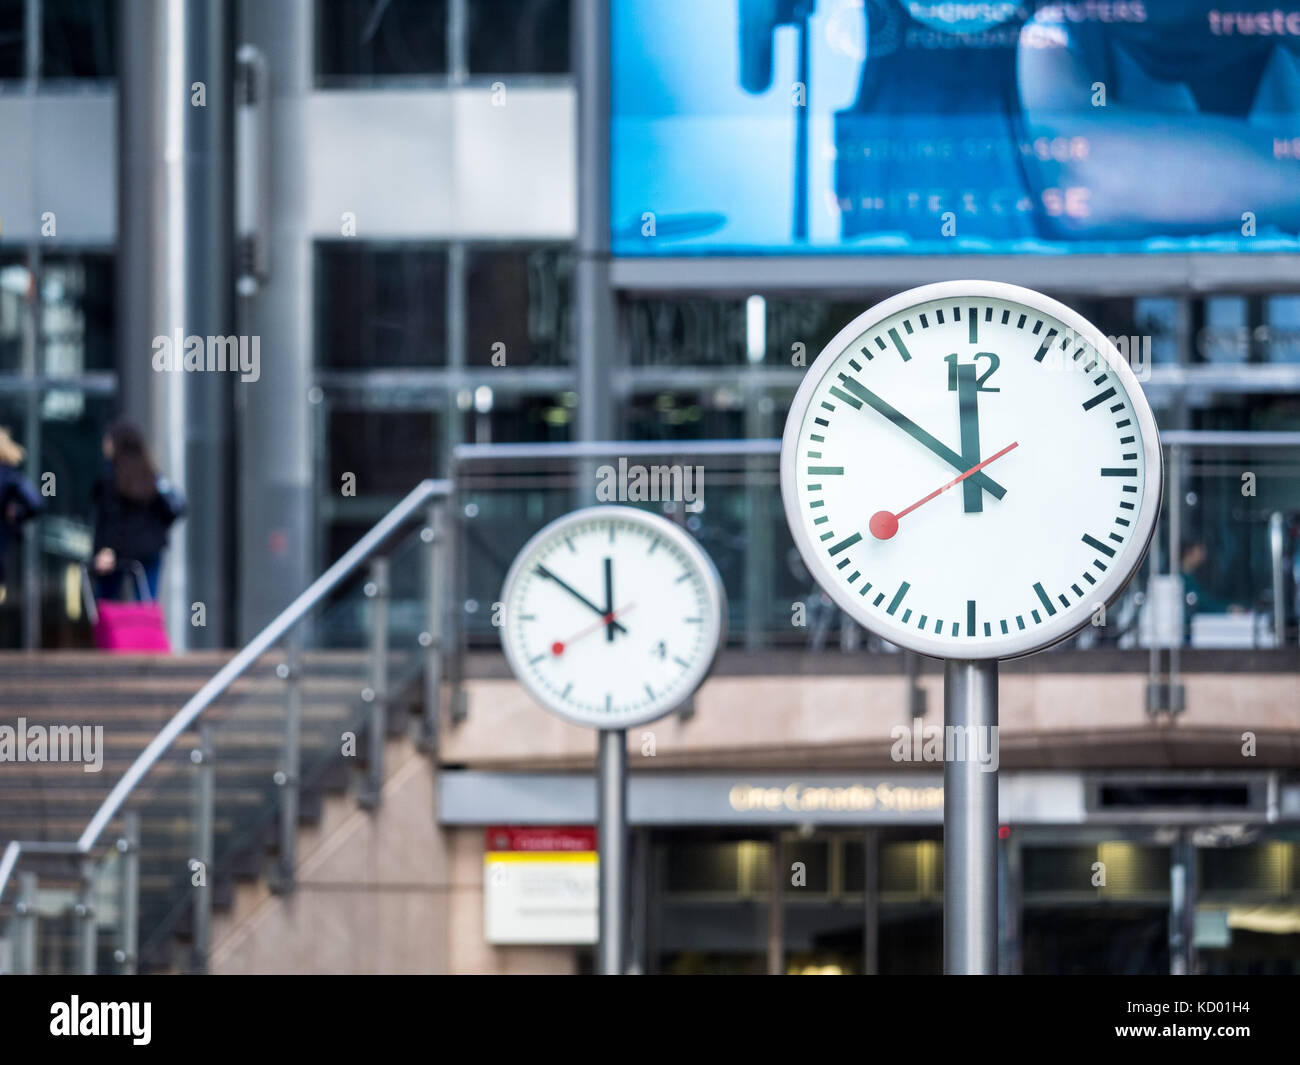 Clocks Canary Wharf Reuters Plaza - two of the Six Public Clocks artwork, by Konstantin Grcic, in Reuters Plaza Canary Wharf London UK Stock Photo